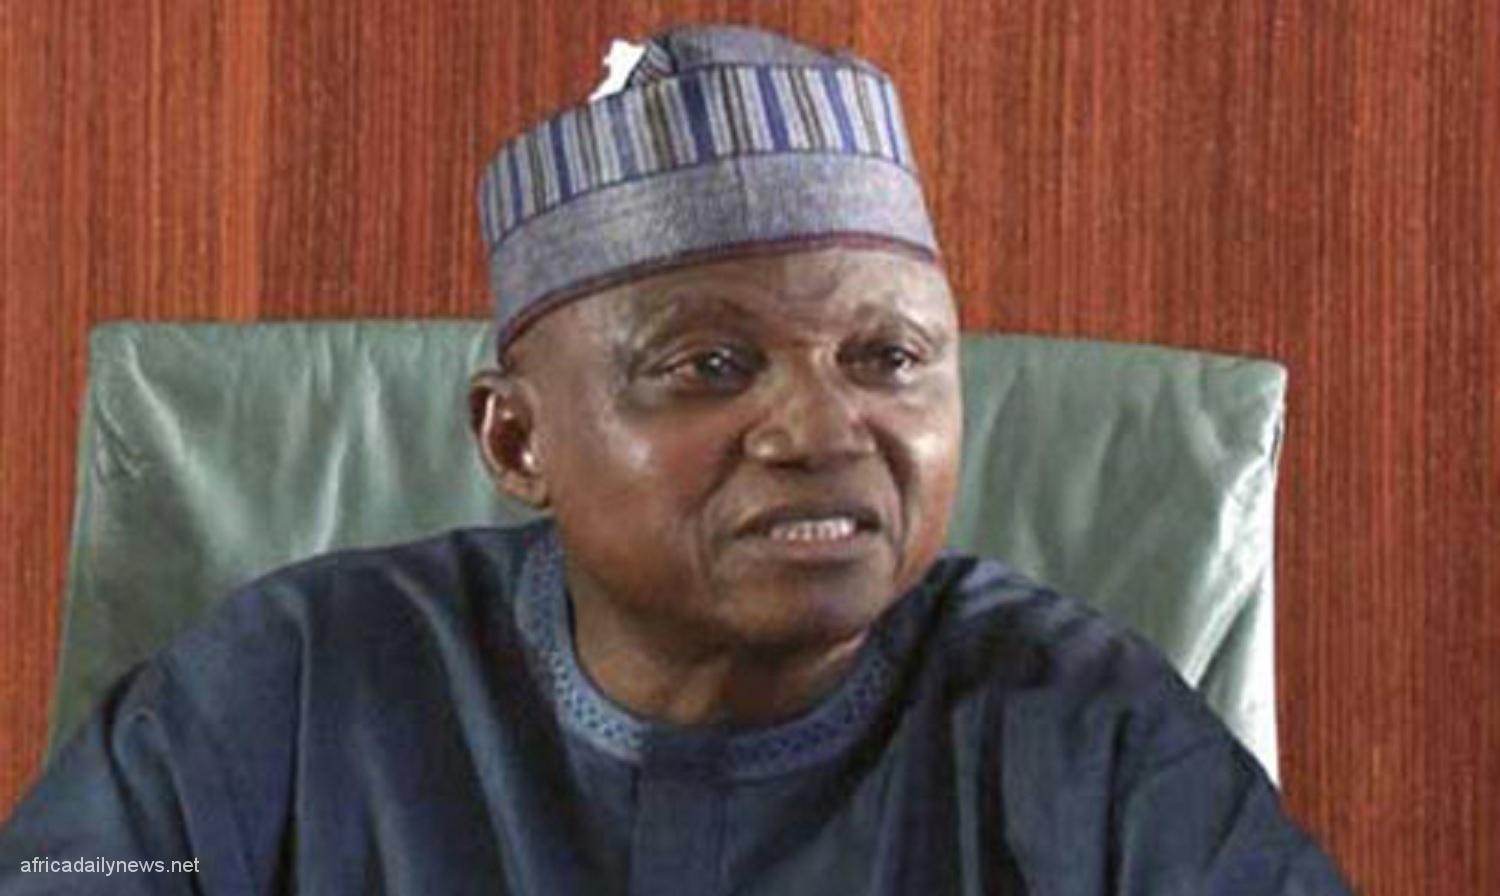 Presidency Reacts To Attack On Buhari’s Team In Kastina